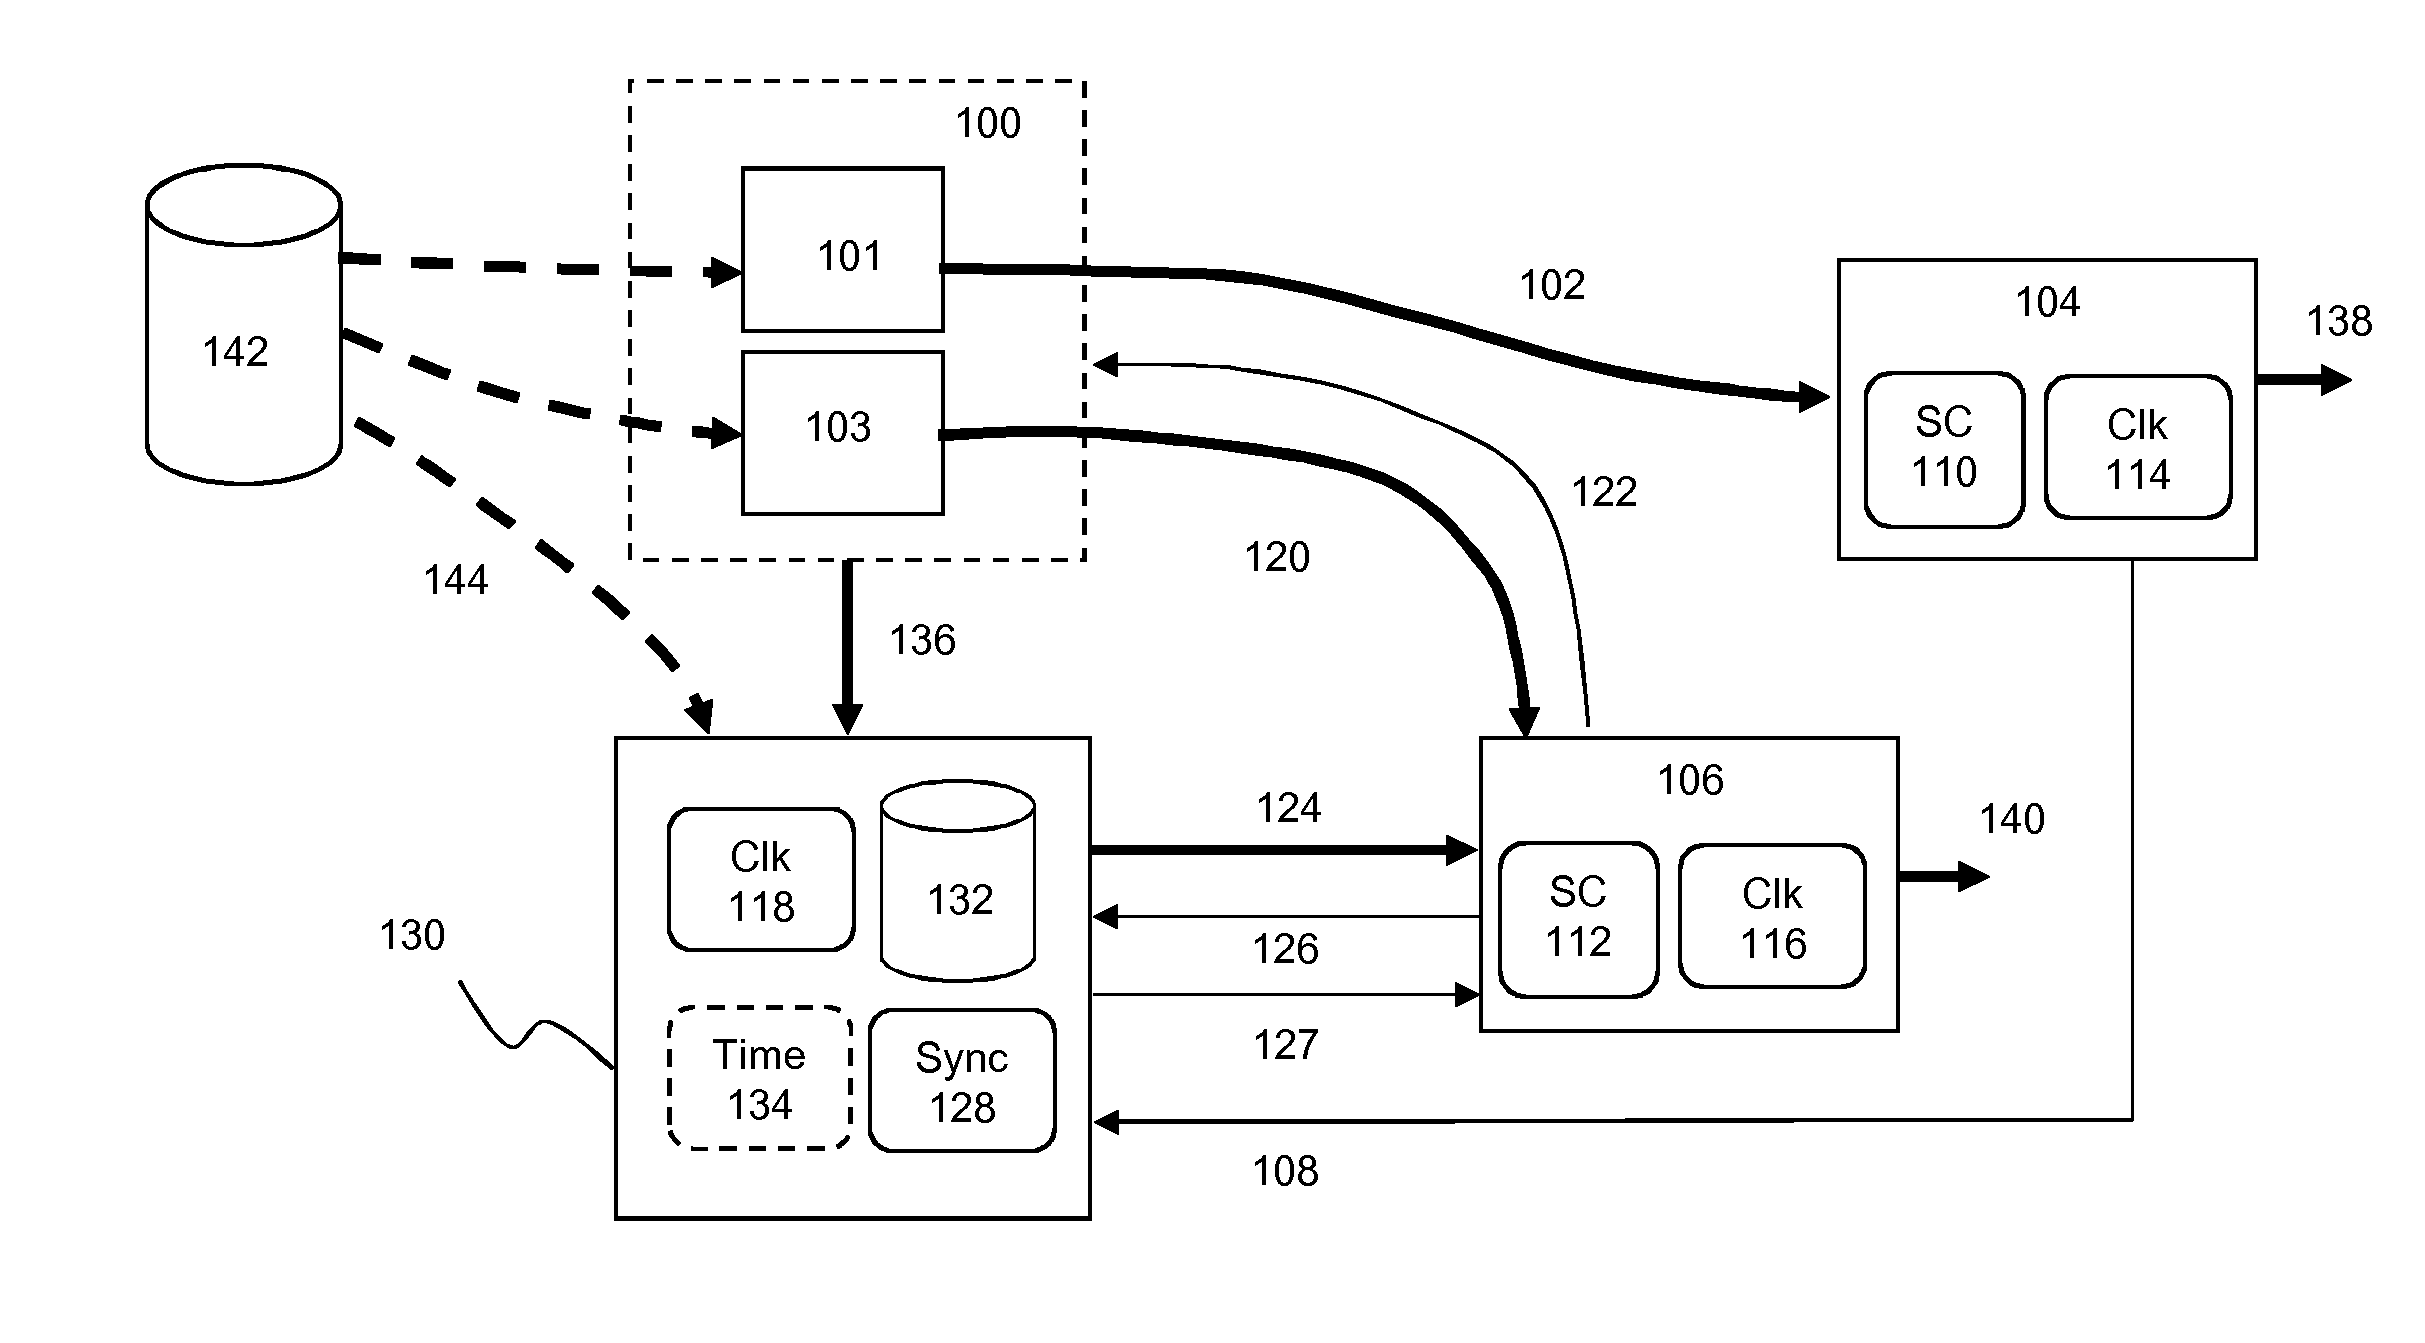 Synchronized data processing between receivers